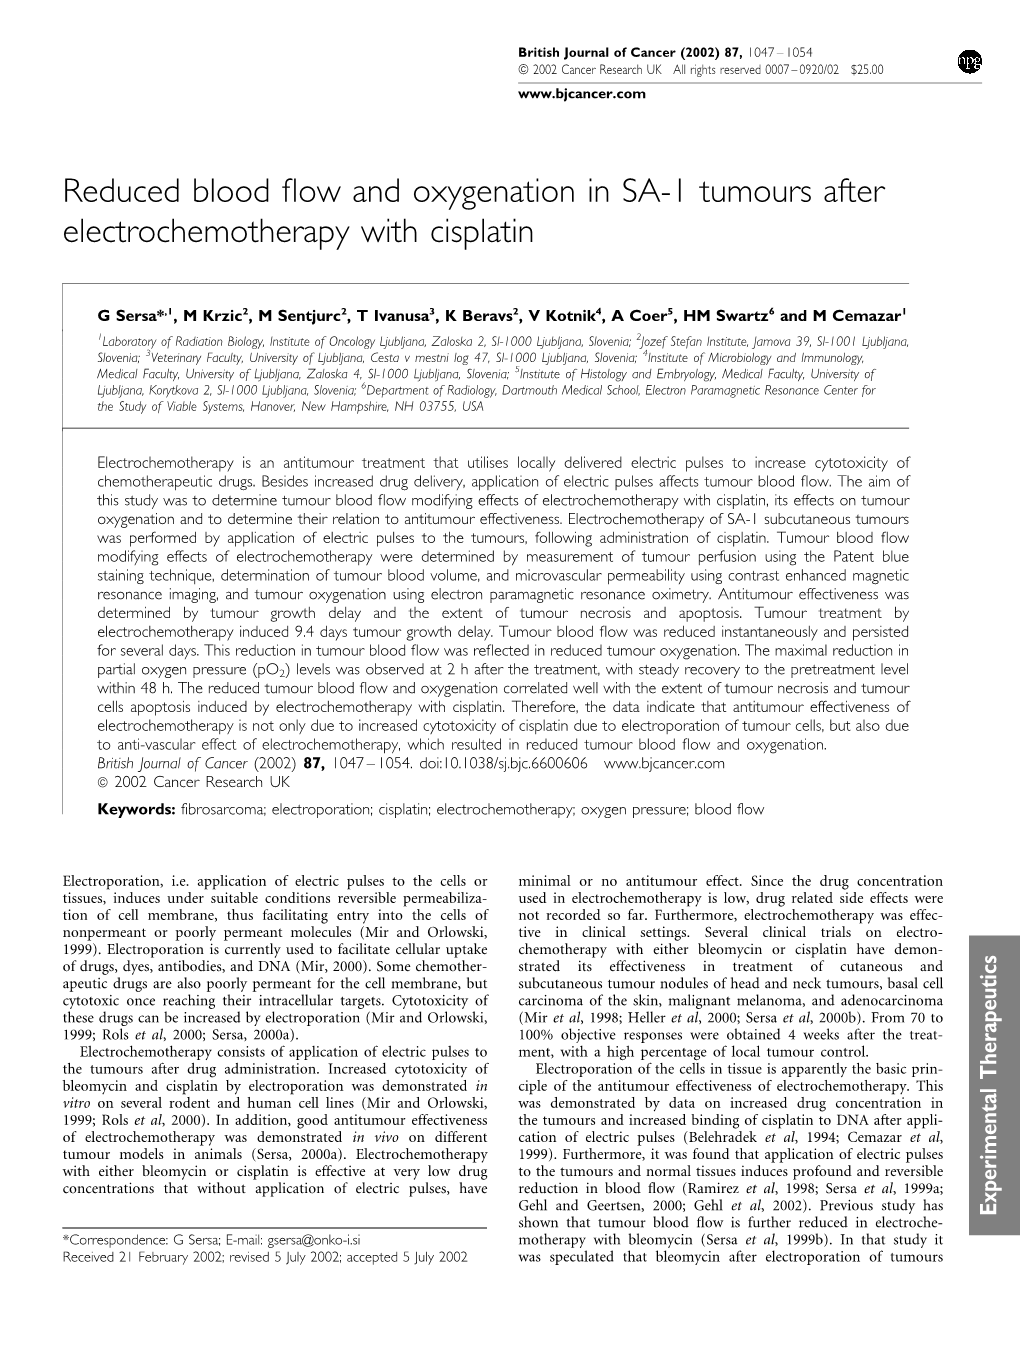 Reduced Blood Flow and Oxygenation in SA-1 Tumours After